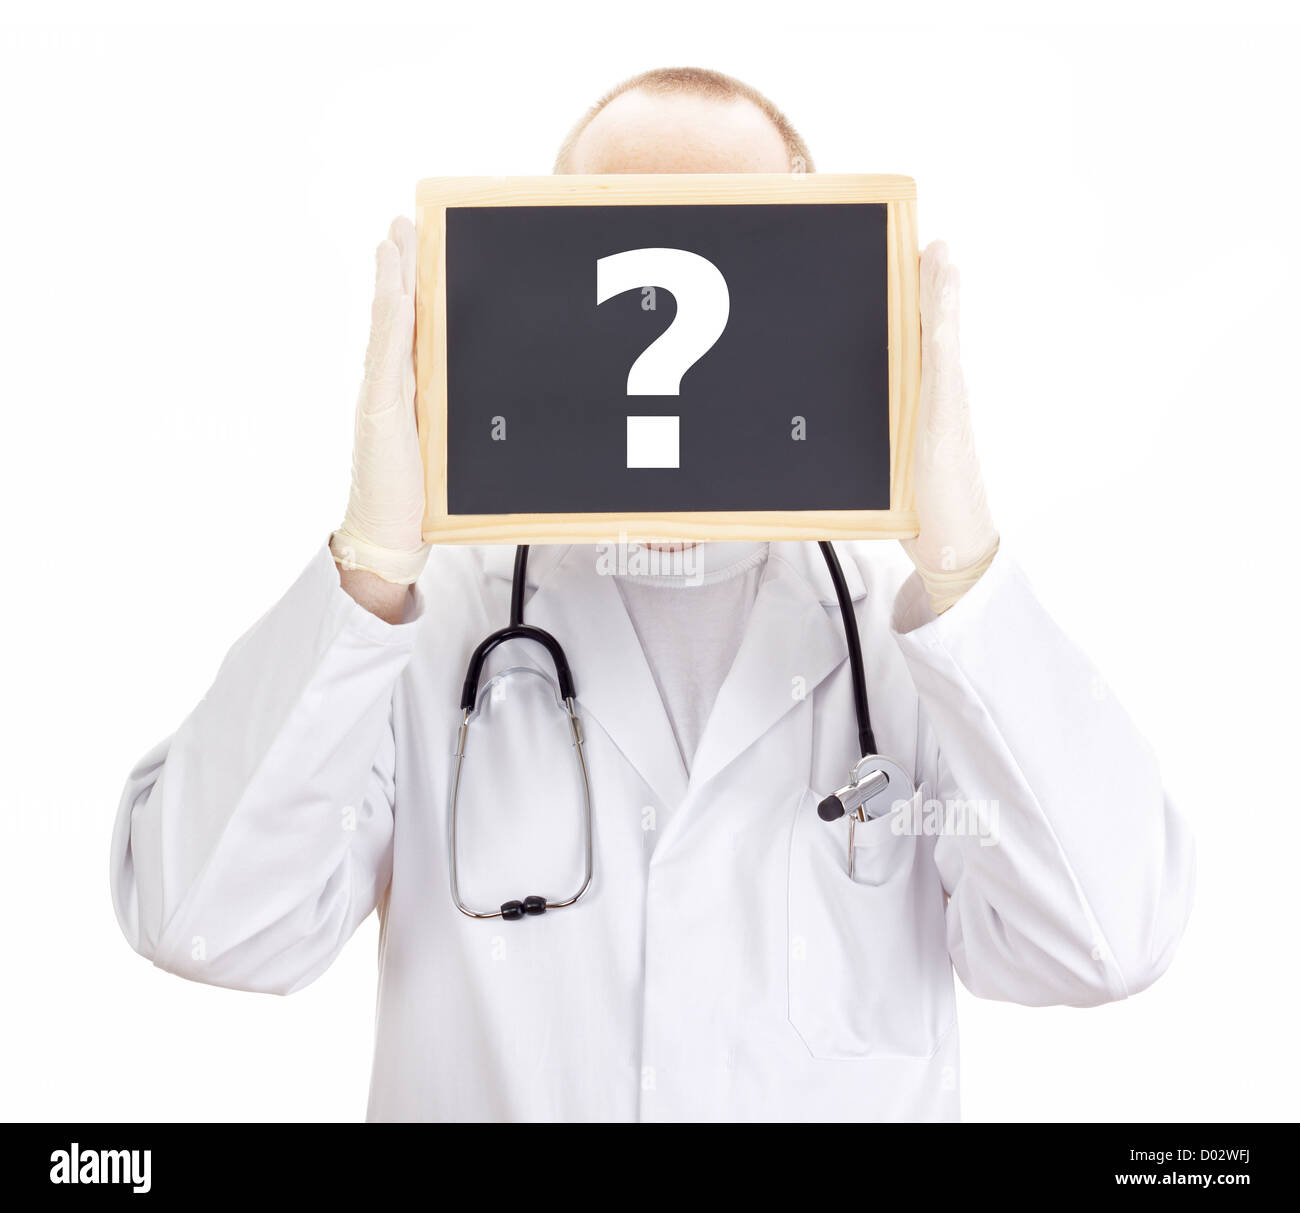 Doctor shows information on blackboard: question mark Stock Photo